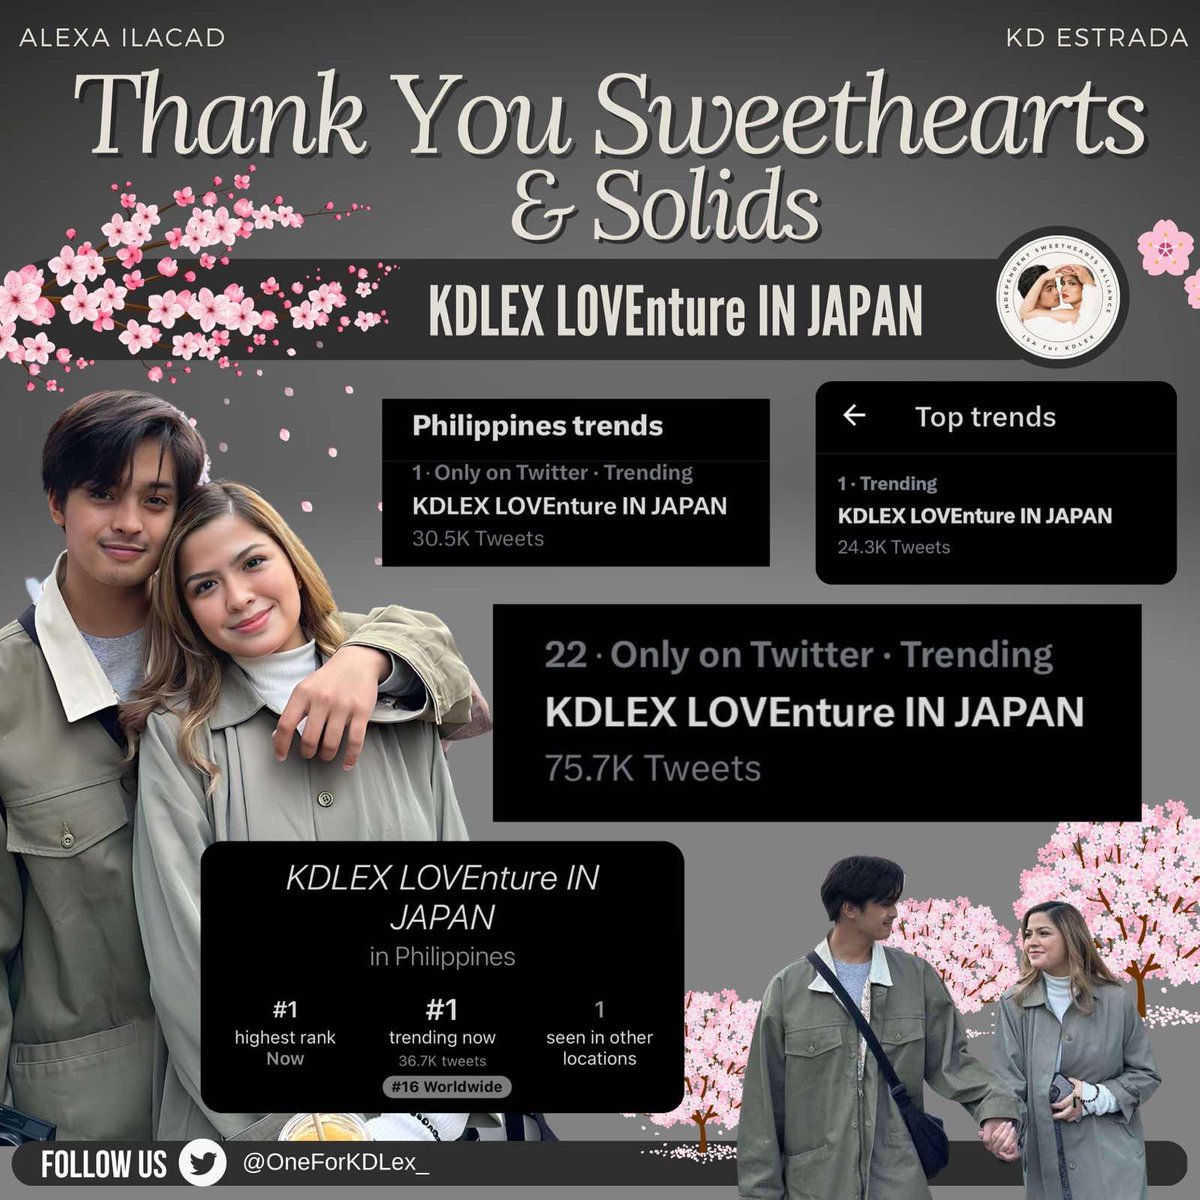 Thank you for tweeting with us, sweethearts and solids! We did a great job. We managed to land at the top spot. See you next time? KDLEX LOVEnture IN JAPAN